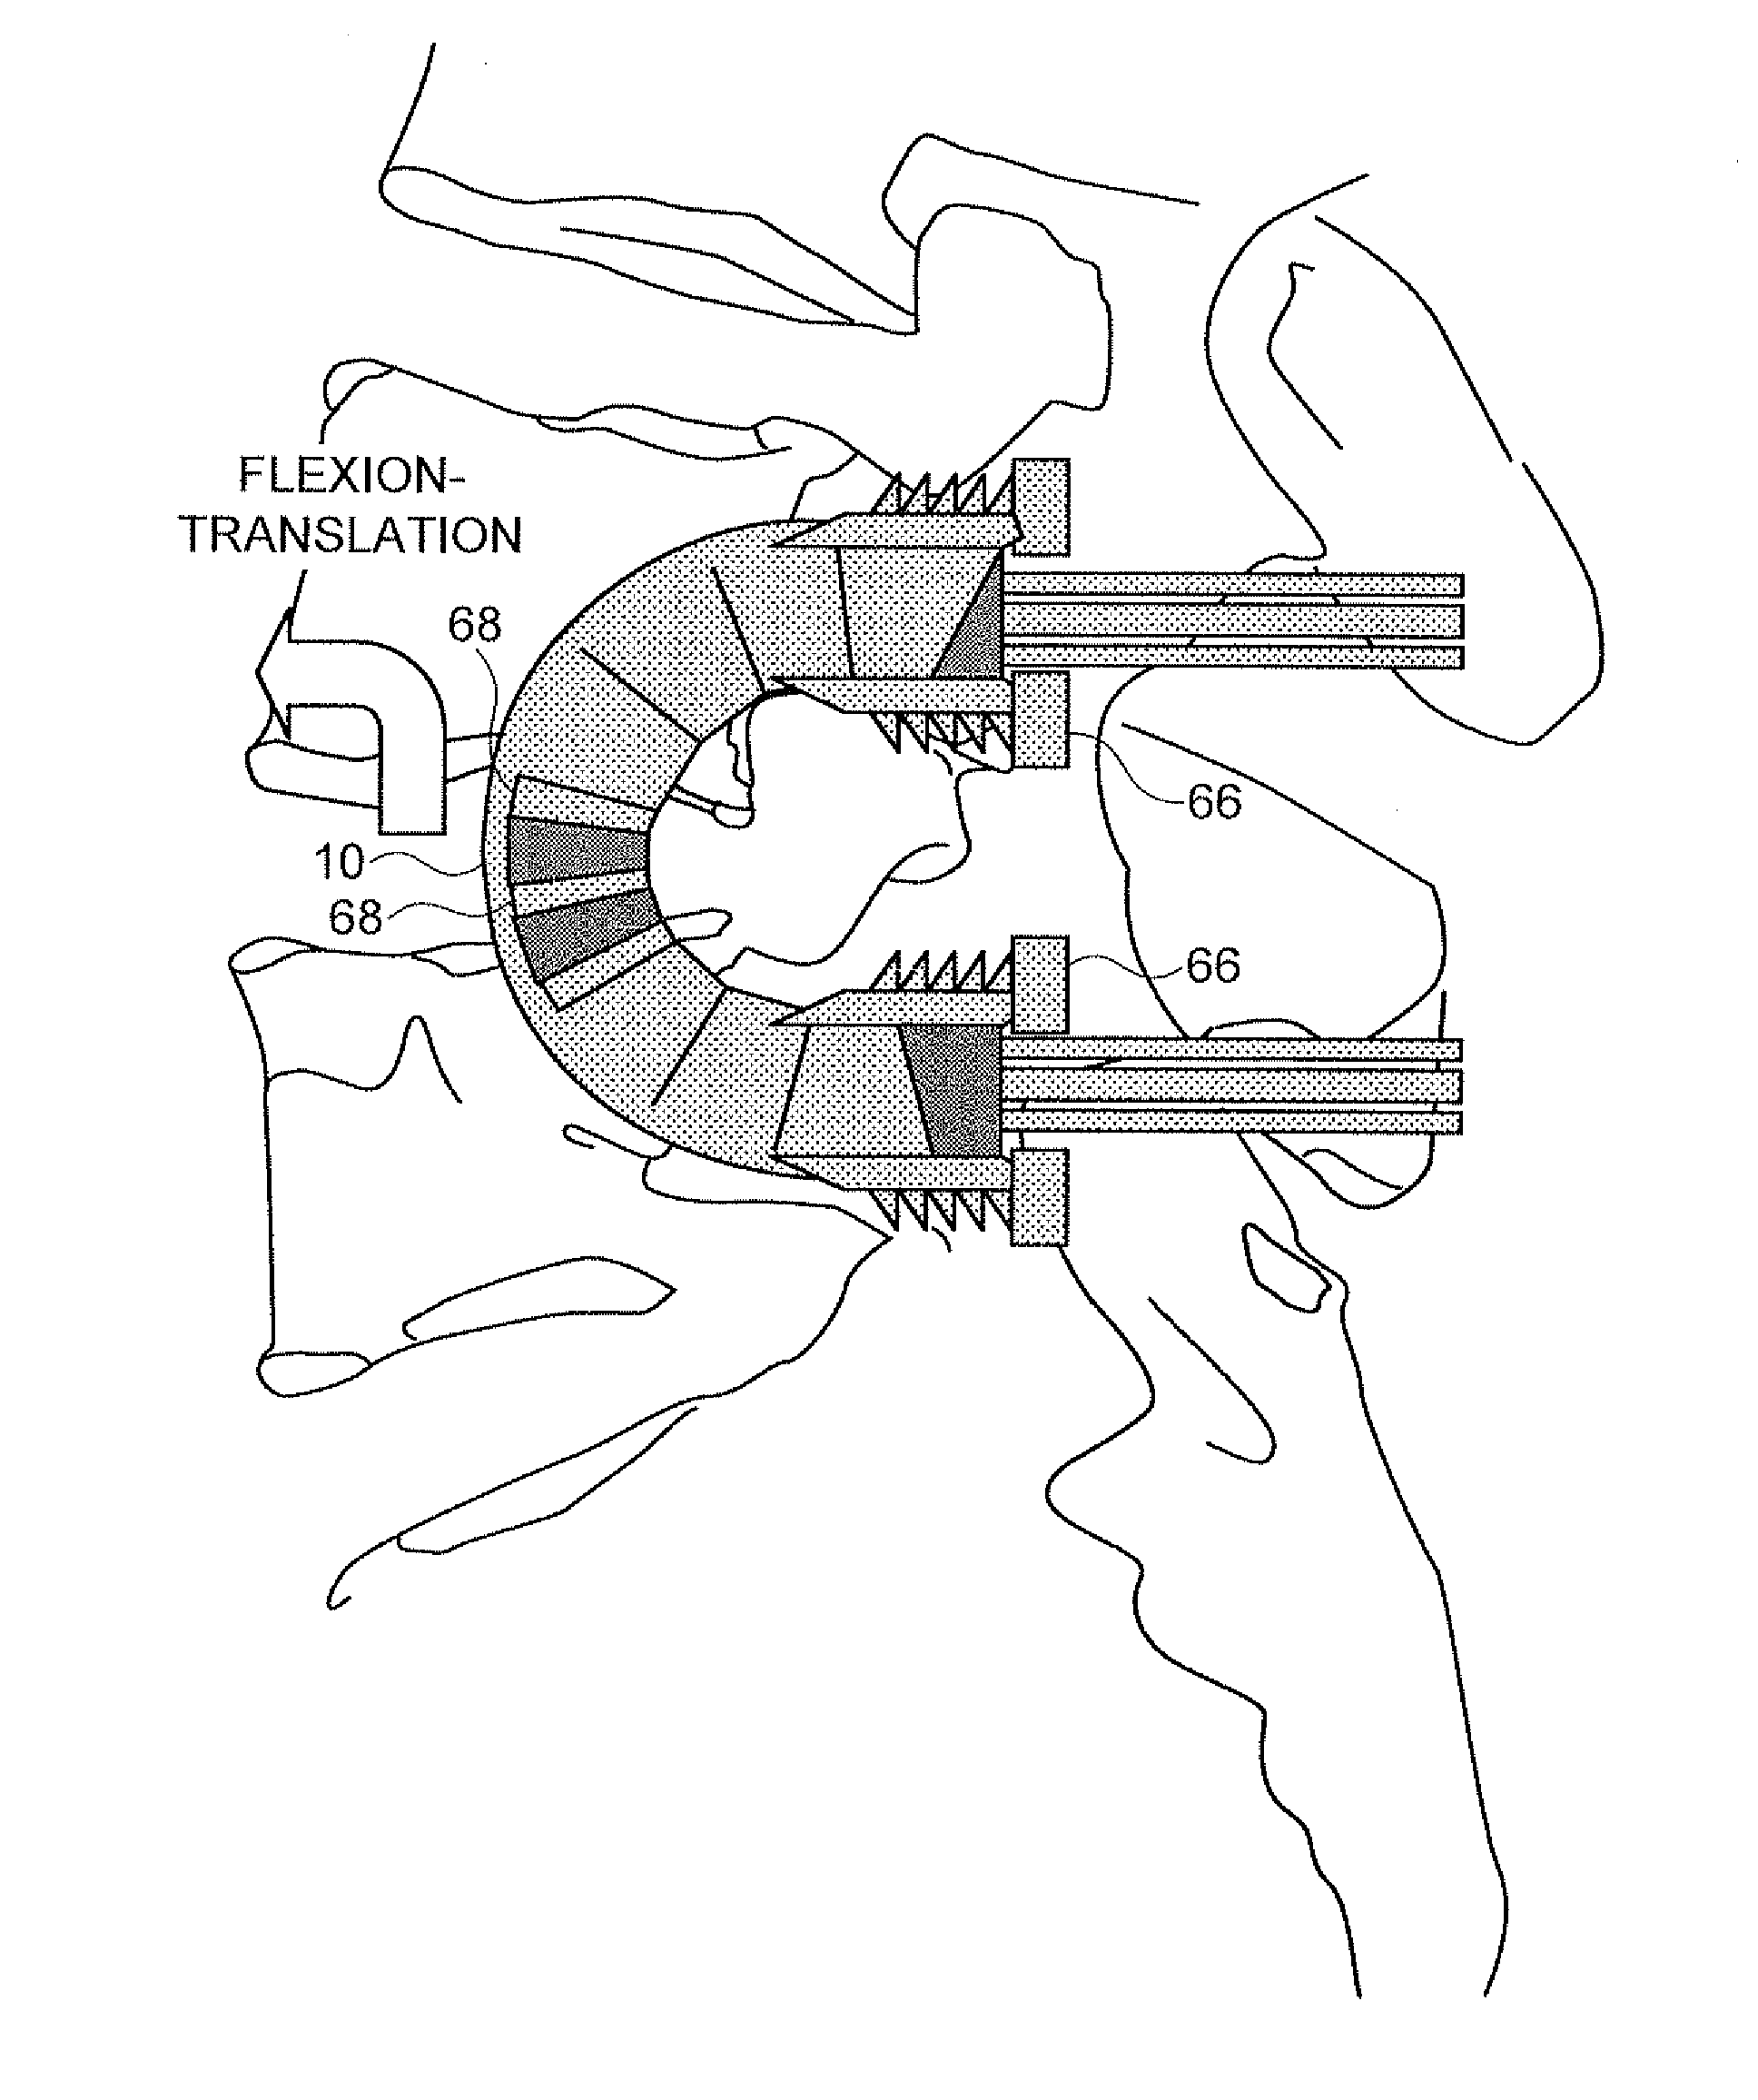 Devices For Introduction Into A Body Via A Substantially Straight Conduit To For a Predefined Curved Configuration, And Methods Employing Such Devices